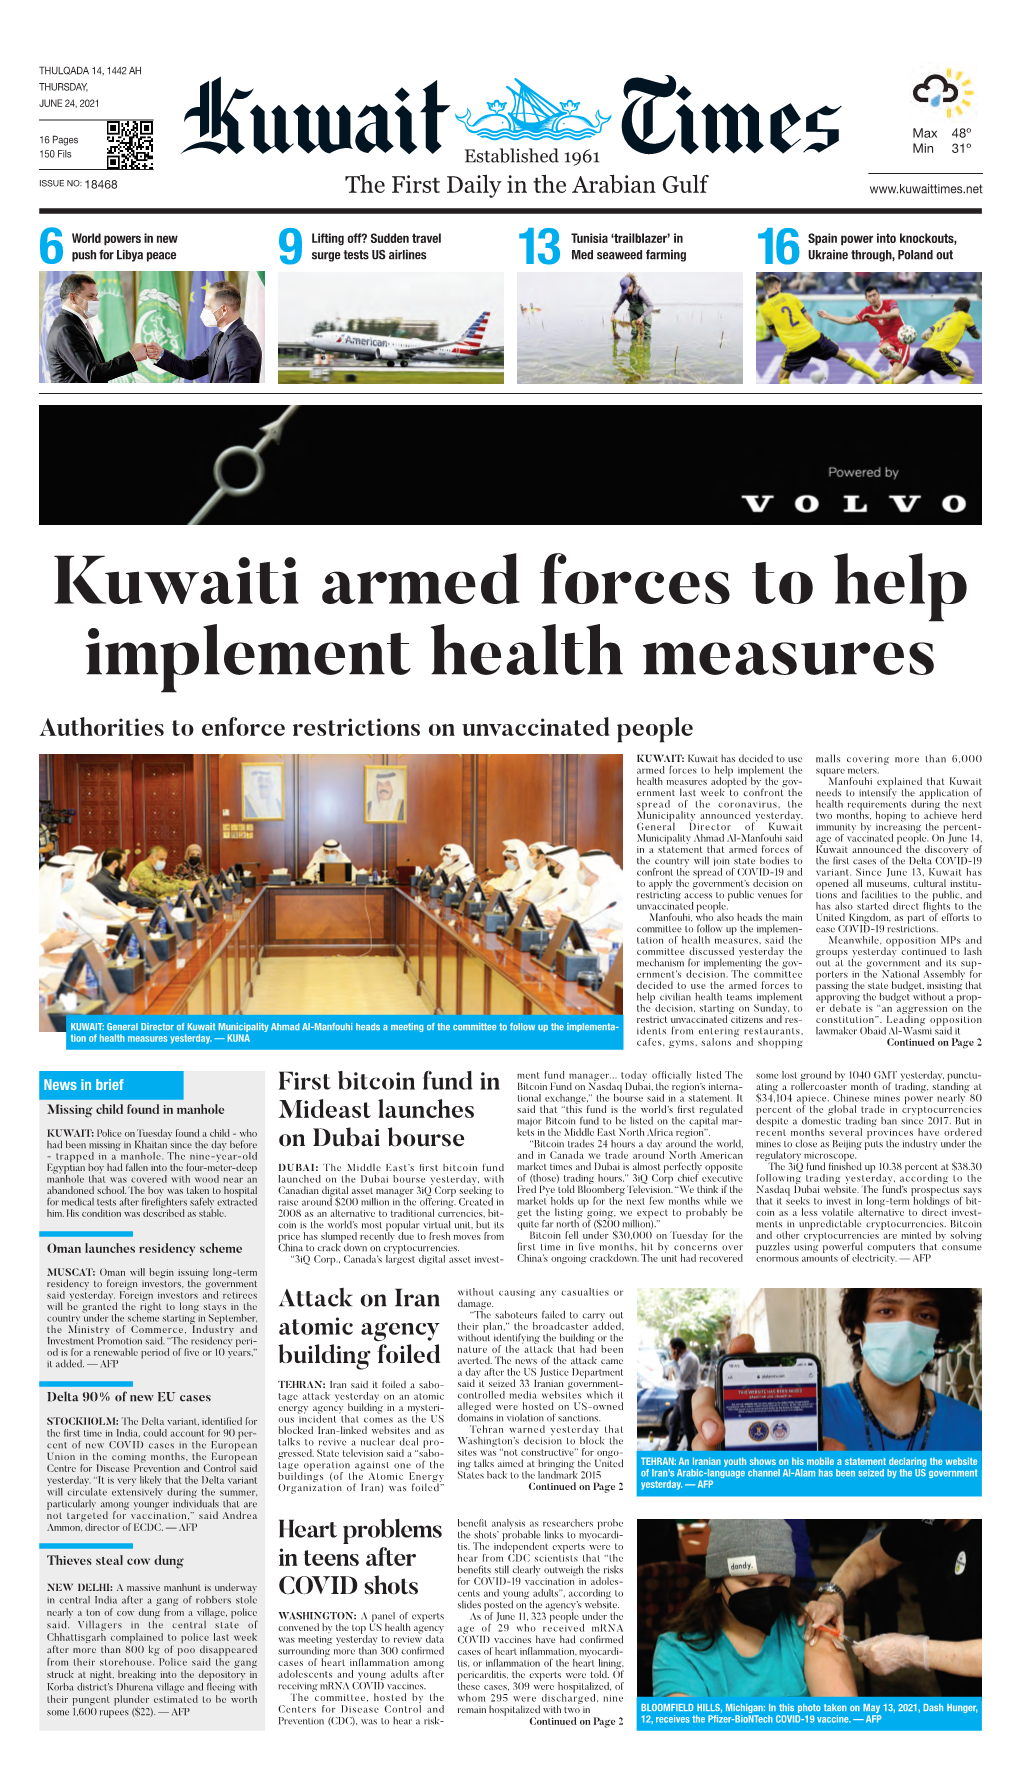 Kuwaiti Armed Forces to Help Implement Health Measures